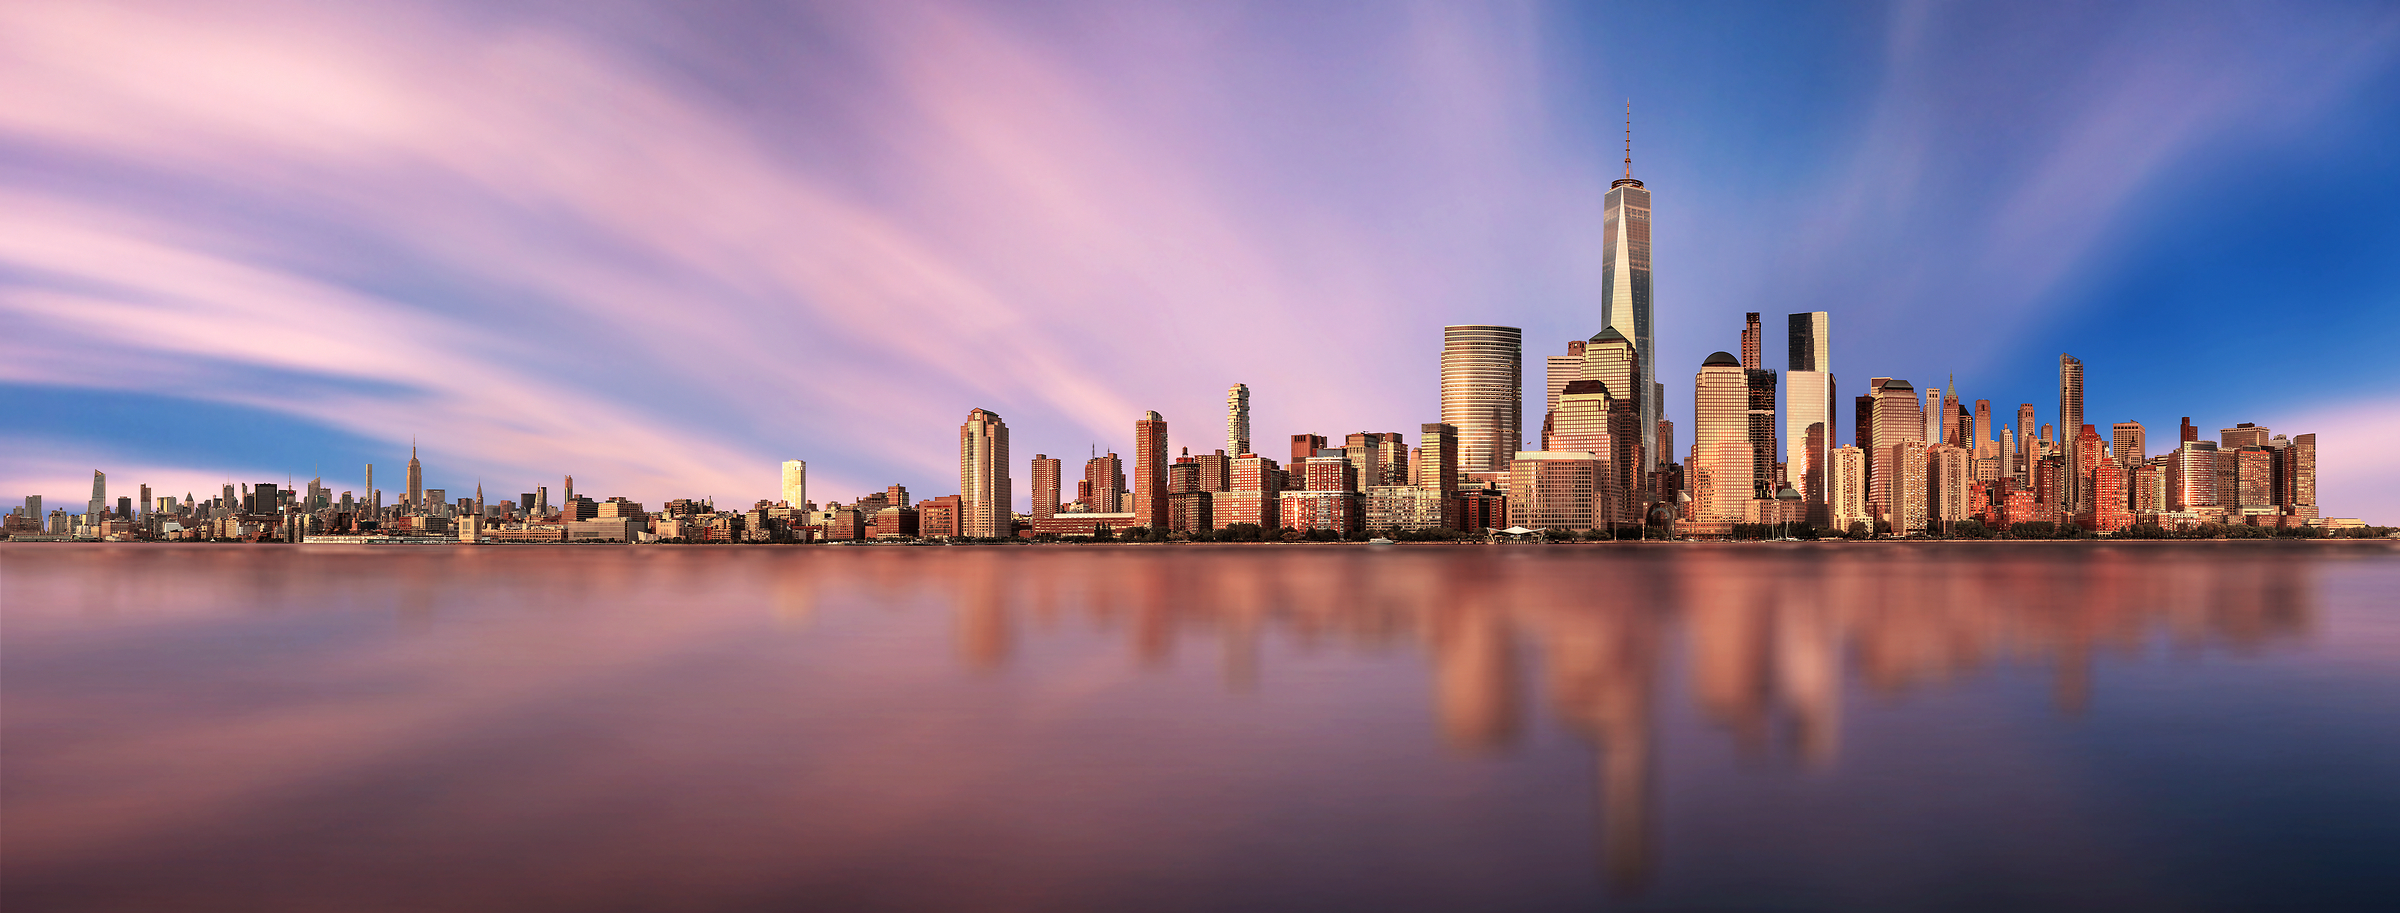 7,070 megapixels! An incredibly high resolution gigapanorama photo of sunset and the New York City skyline; cityscape fine art print created by Chris Collacott in Manhattan, NYC.